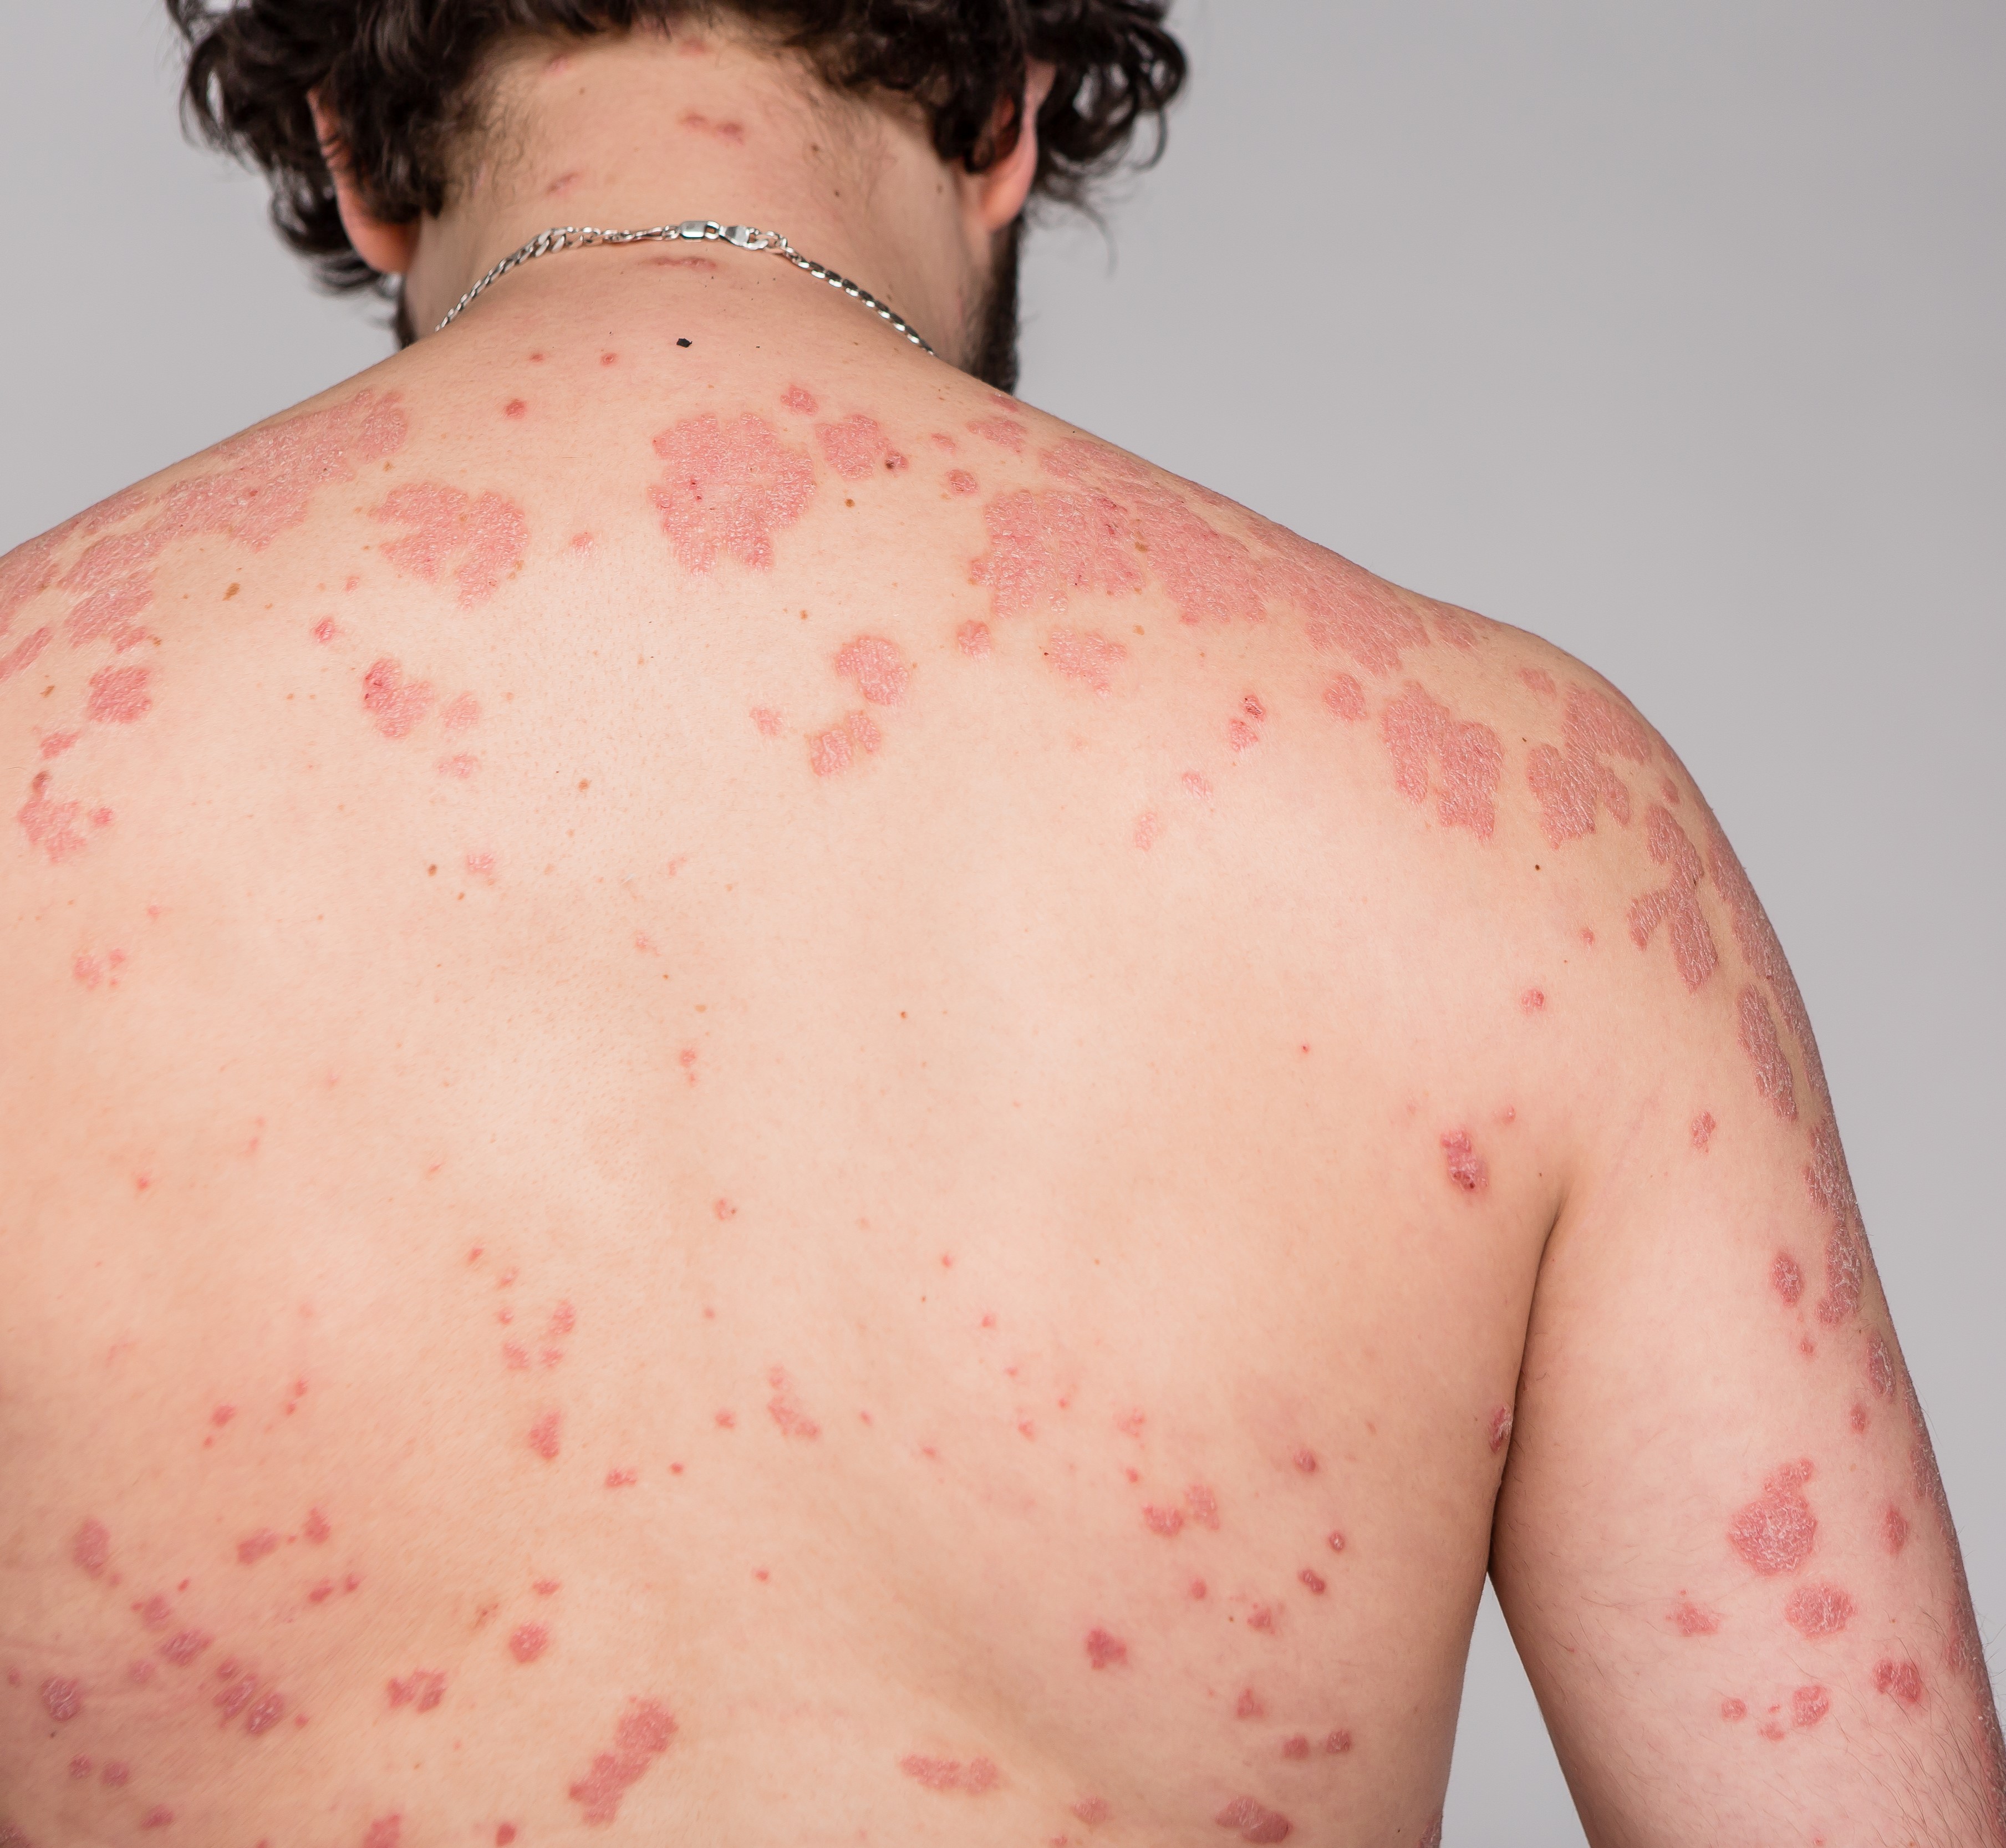 A man with red spots on his back and arms.